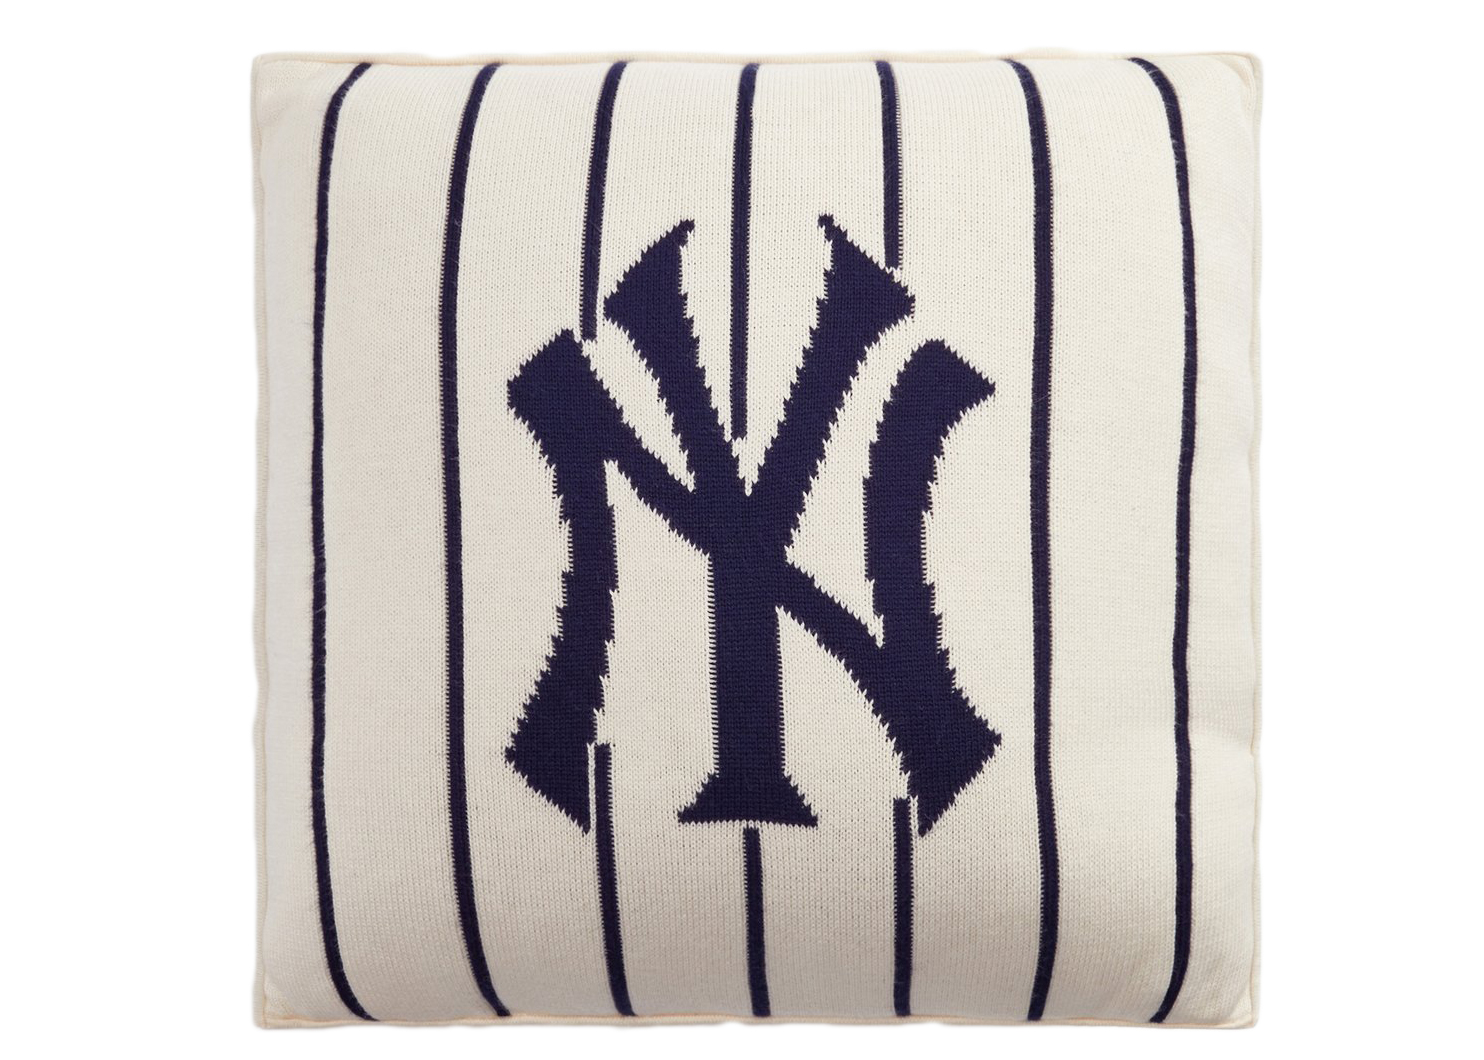 Kith & MLB for New York Yankees Pinstripe Knitted Throw Pillow